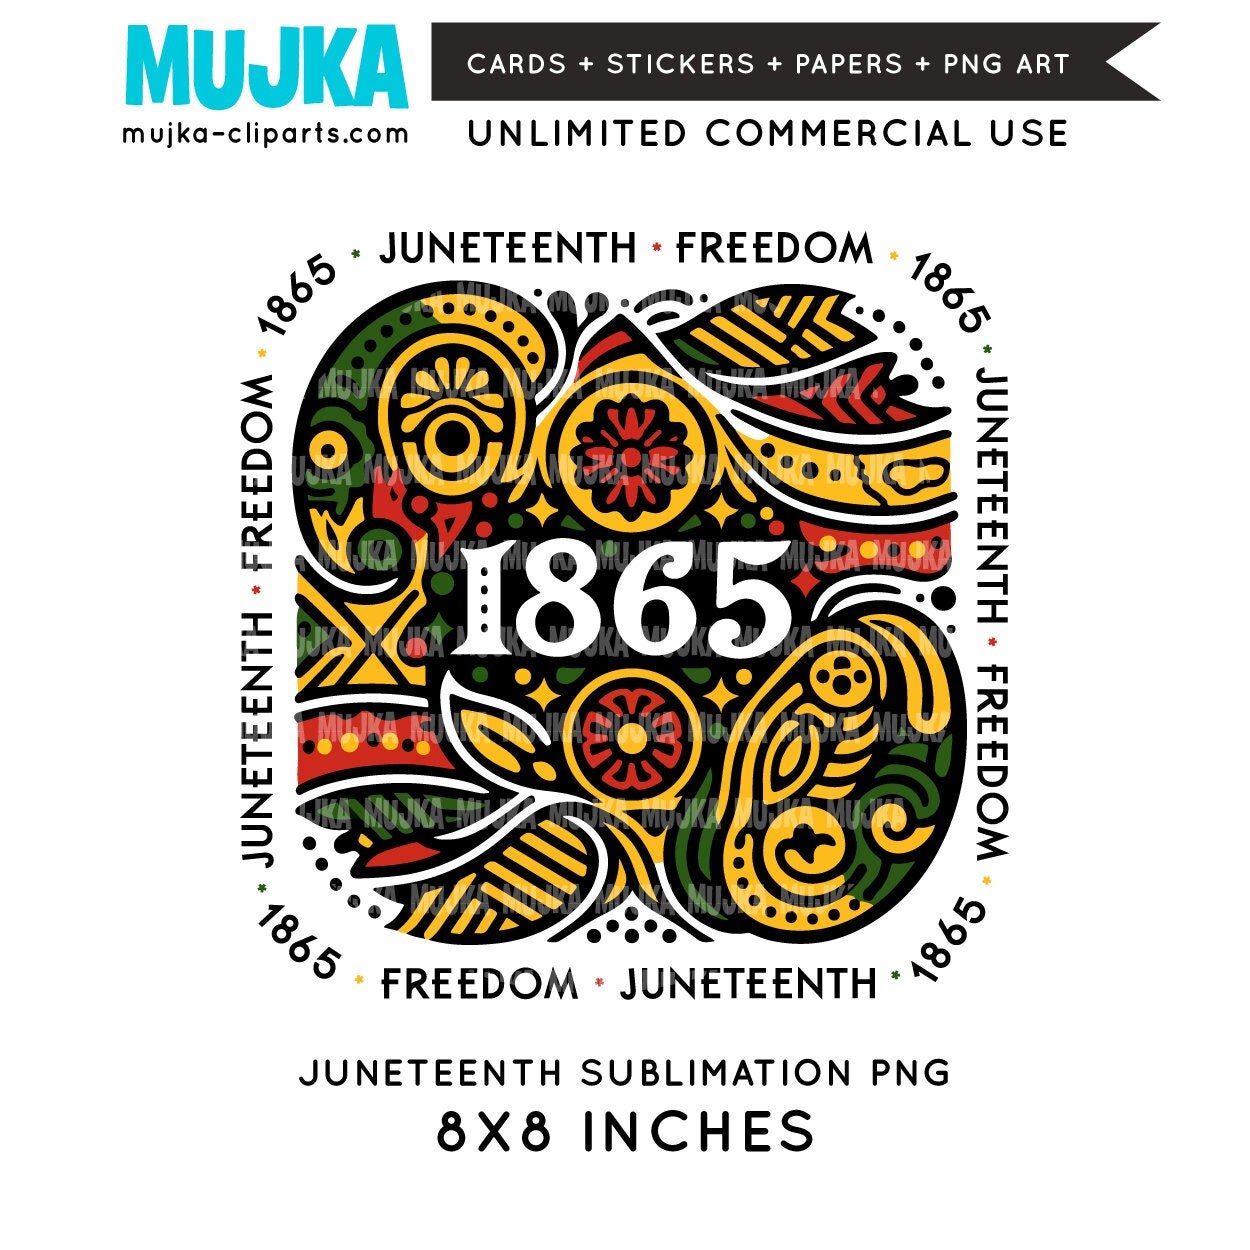 Juneteenth PNG, Juneteenth clipart, Juneteenth sublimation designs download, 1865 png, Black History Month image, African American printable